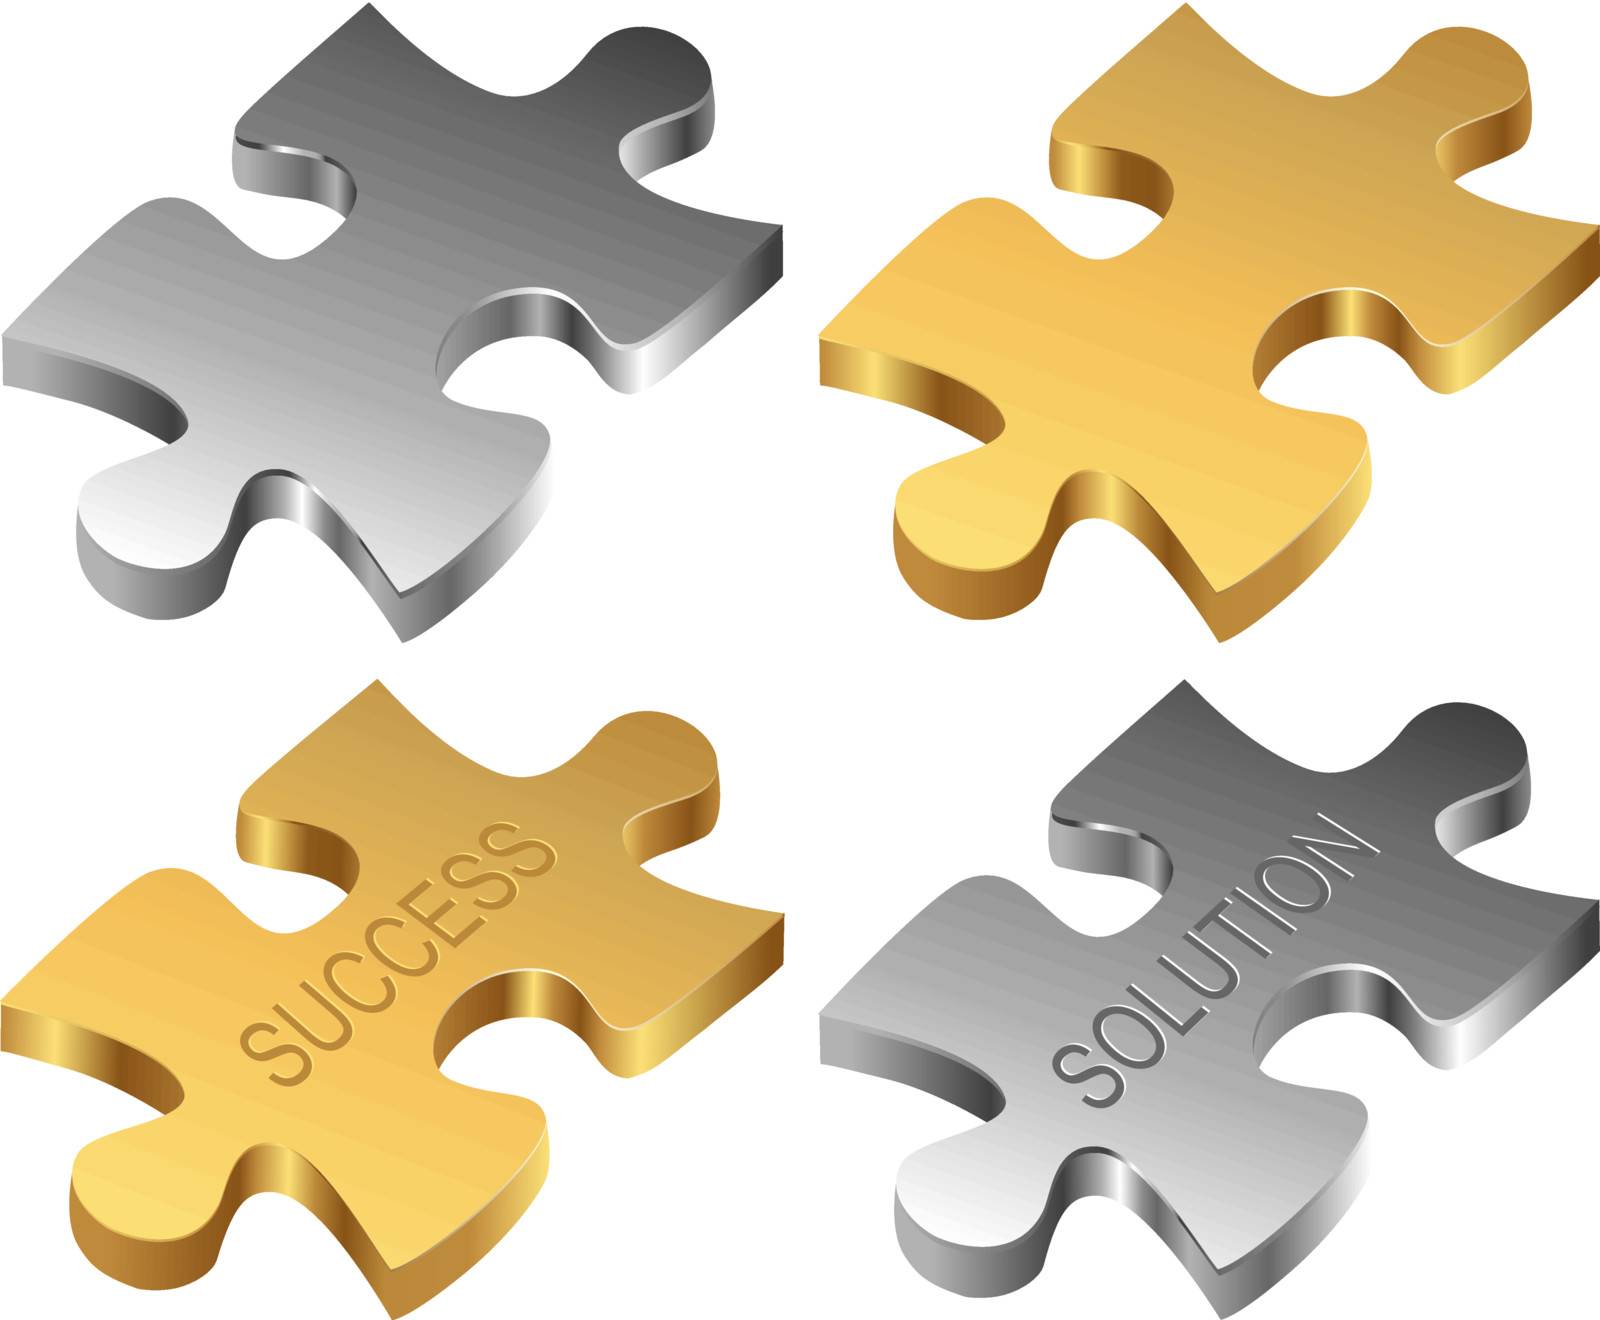 Silver and golden jigsaw pieces. One with the word success, another with solution and two blank pieces